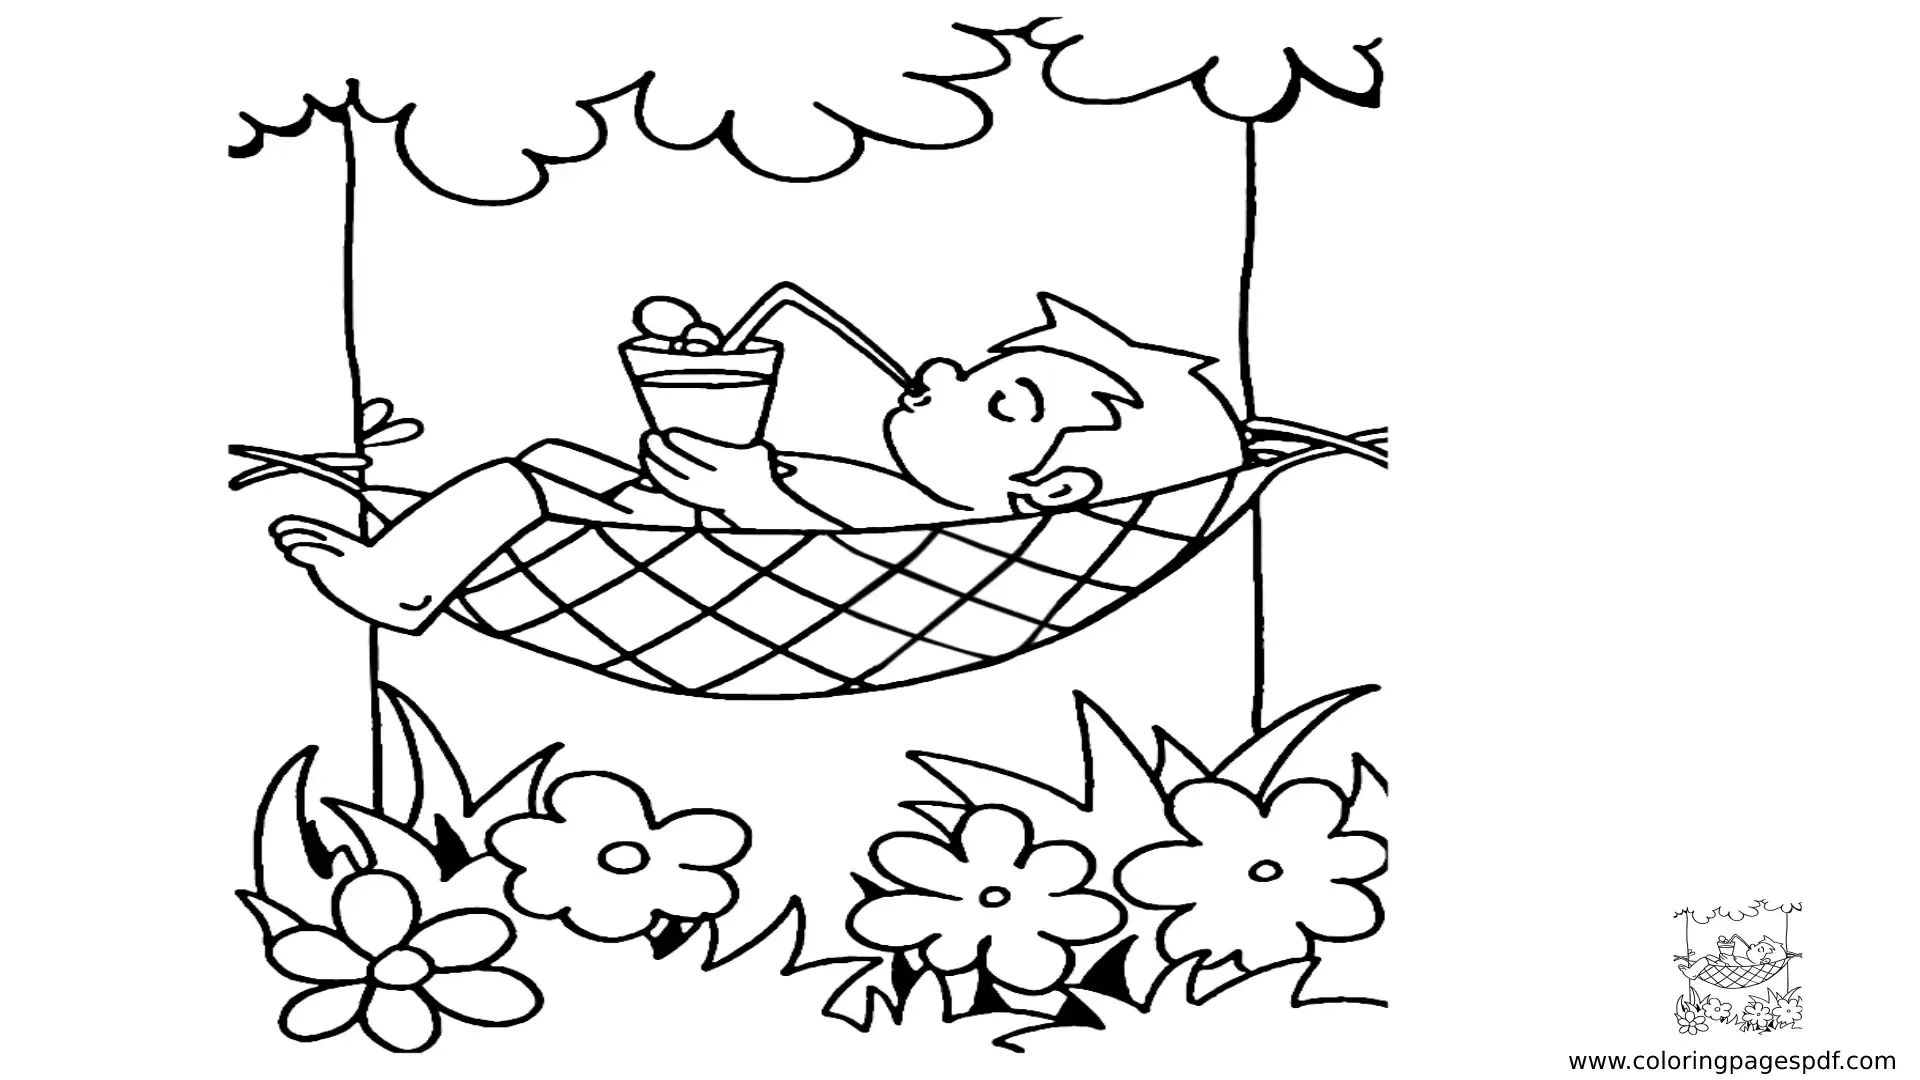 Coloring Pages Of A Boy Drinking Juice On A Swing